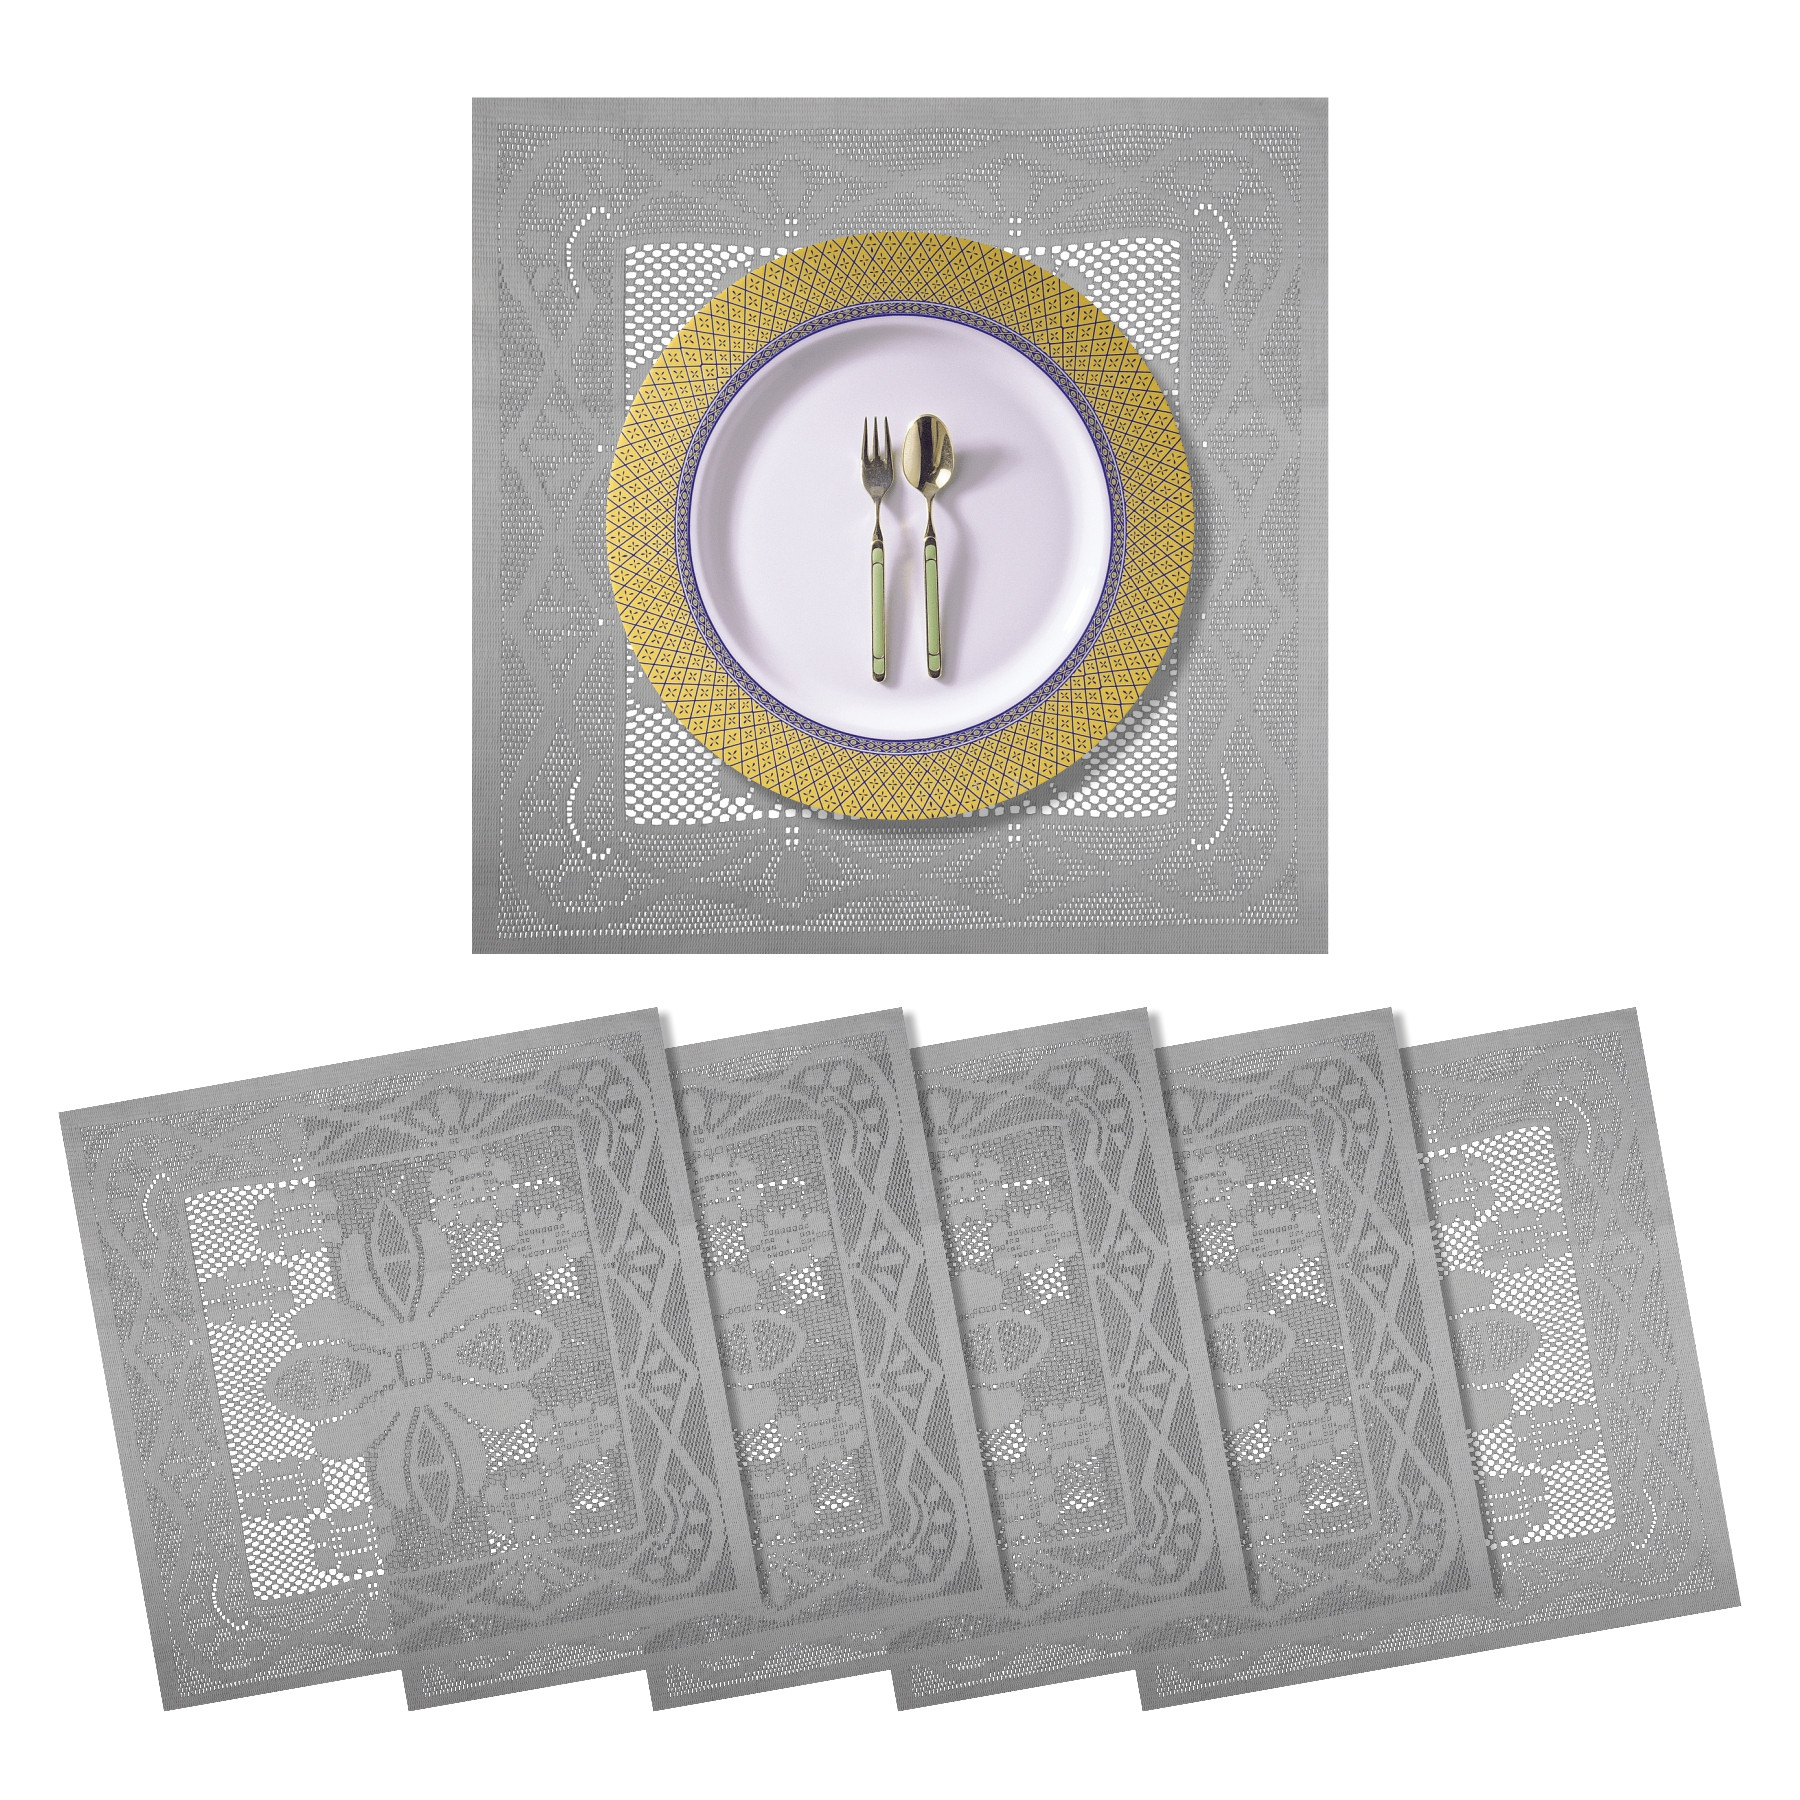 Kuber Industries Placemat | Dining Table Placemat | Center Table Mats | Square Plain Net Placemat Set | Side Table Placemats for Hotel-Home Décor | 20 Inch |White